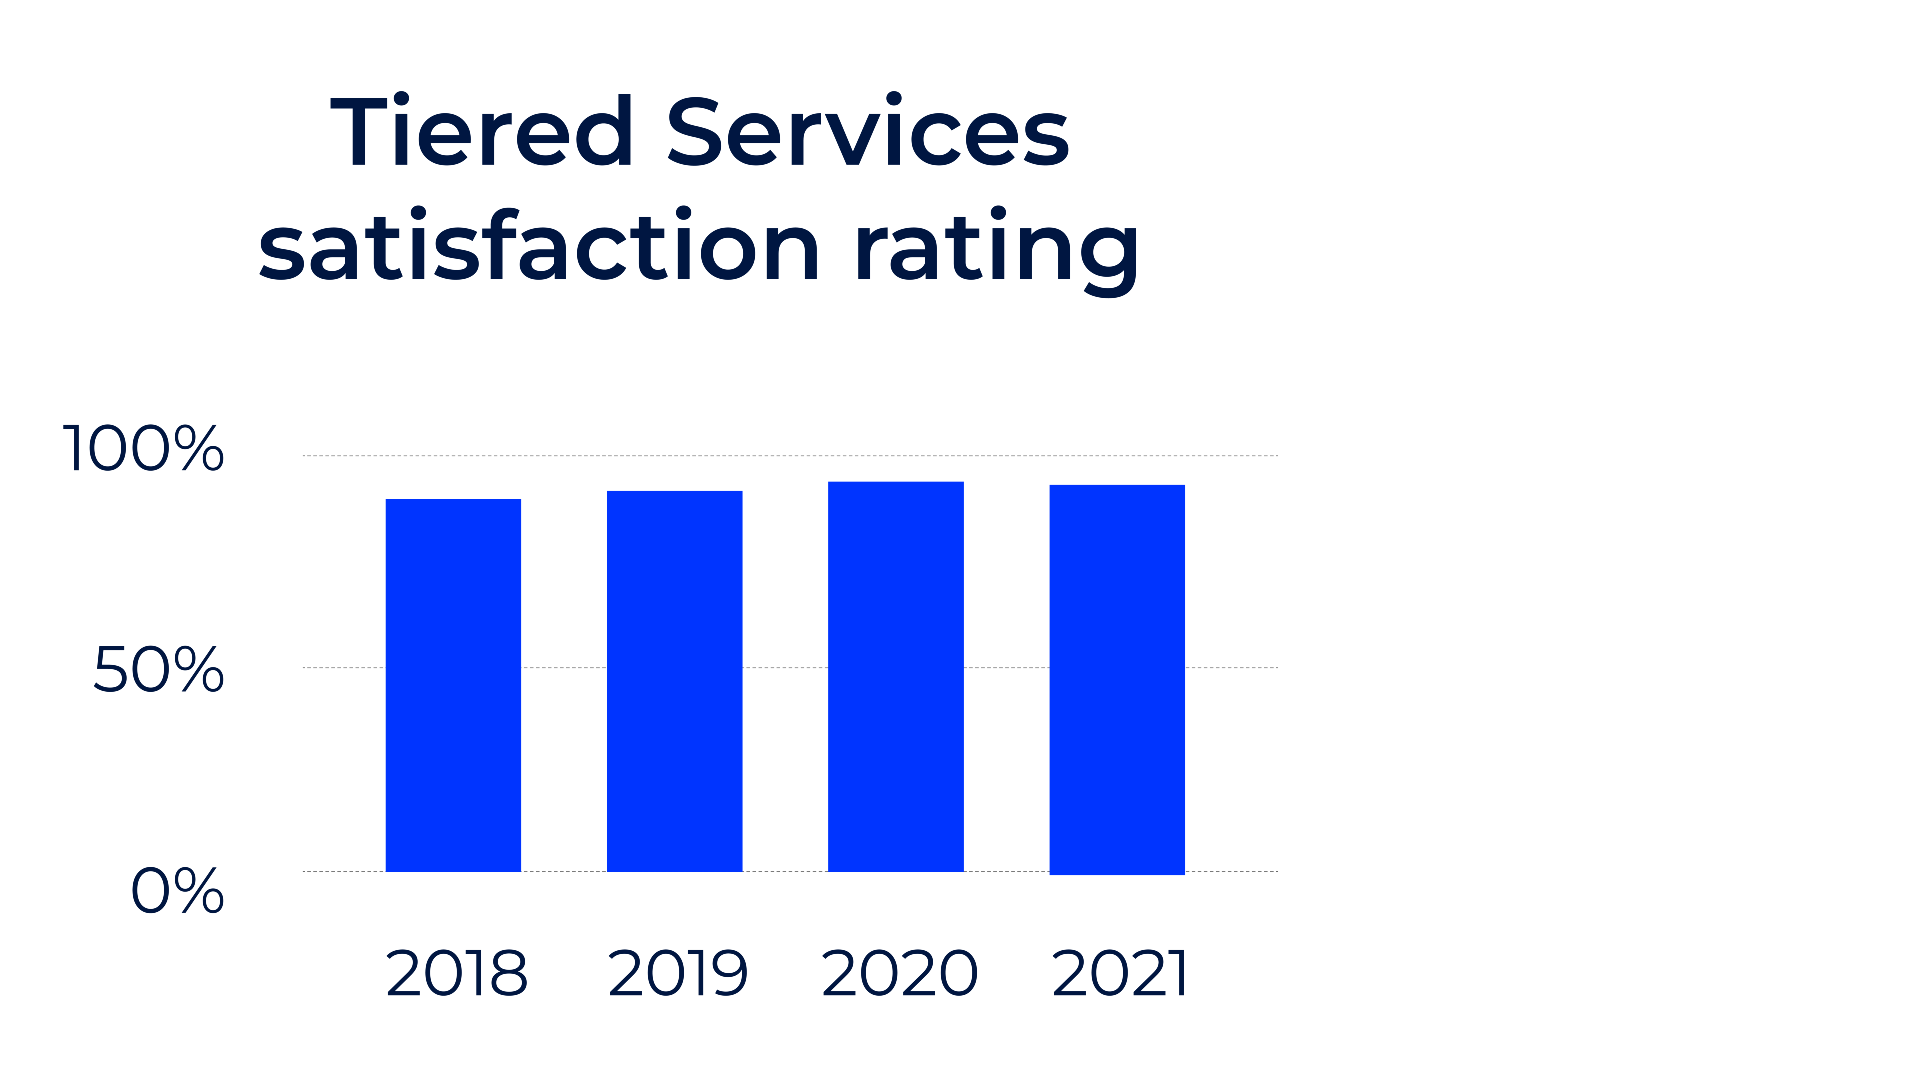 Column graph showing tiered services satisfaction rating consistently at approx. 90% or higher from 2018-2021.